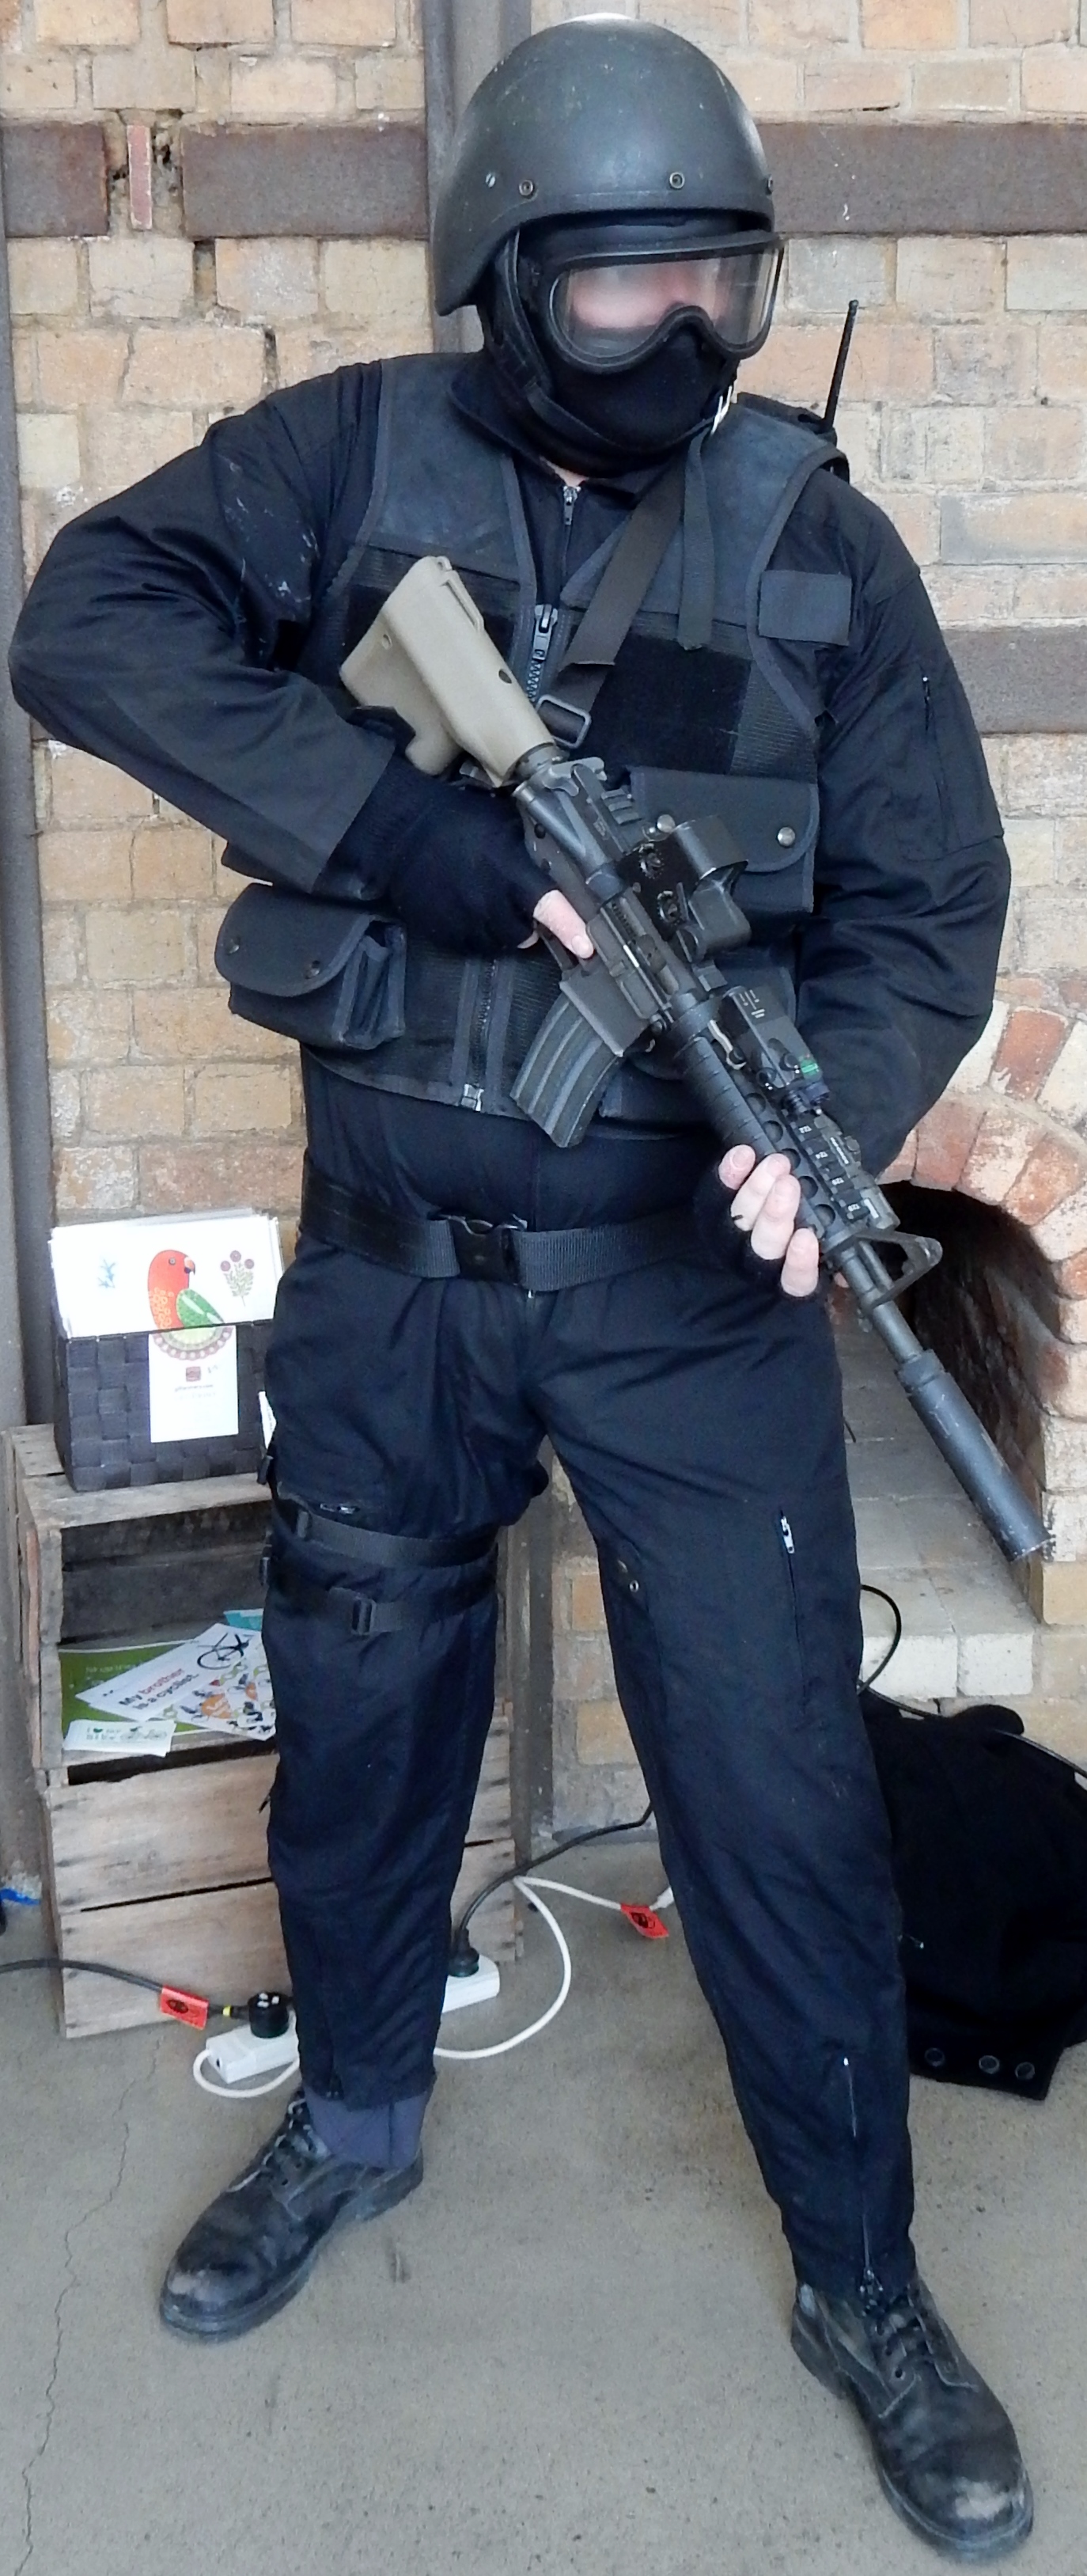 Behind the scenes: SWAT/Tactical Police Leader on Feature Film 'Cult Girls' Director Mark Bakaitis/Encore Productions